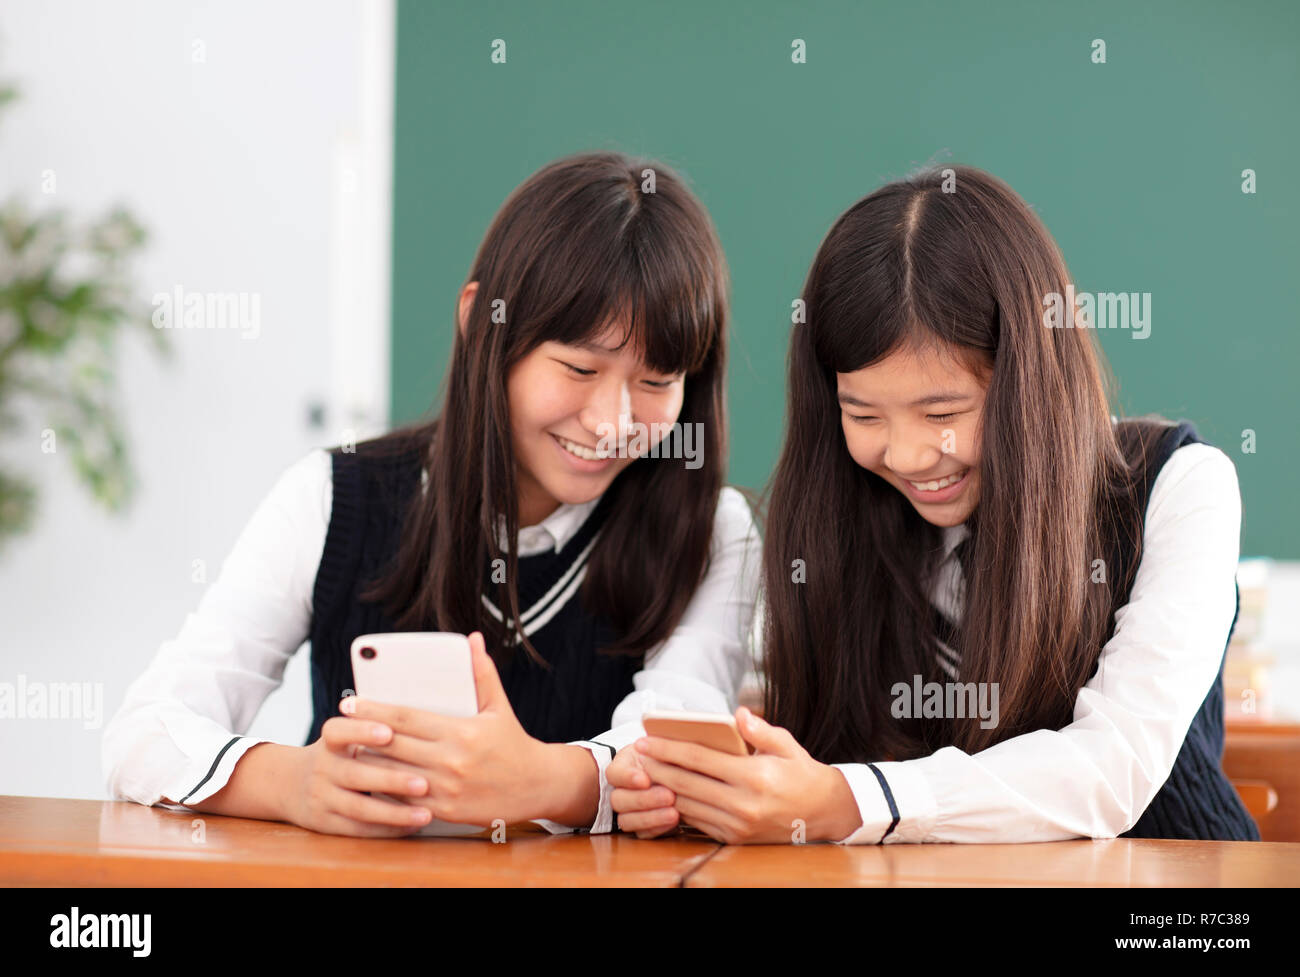 teenager girl student watching the smart phone in classroom Stock Photo